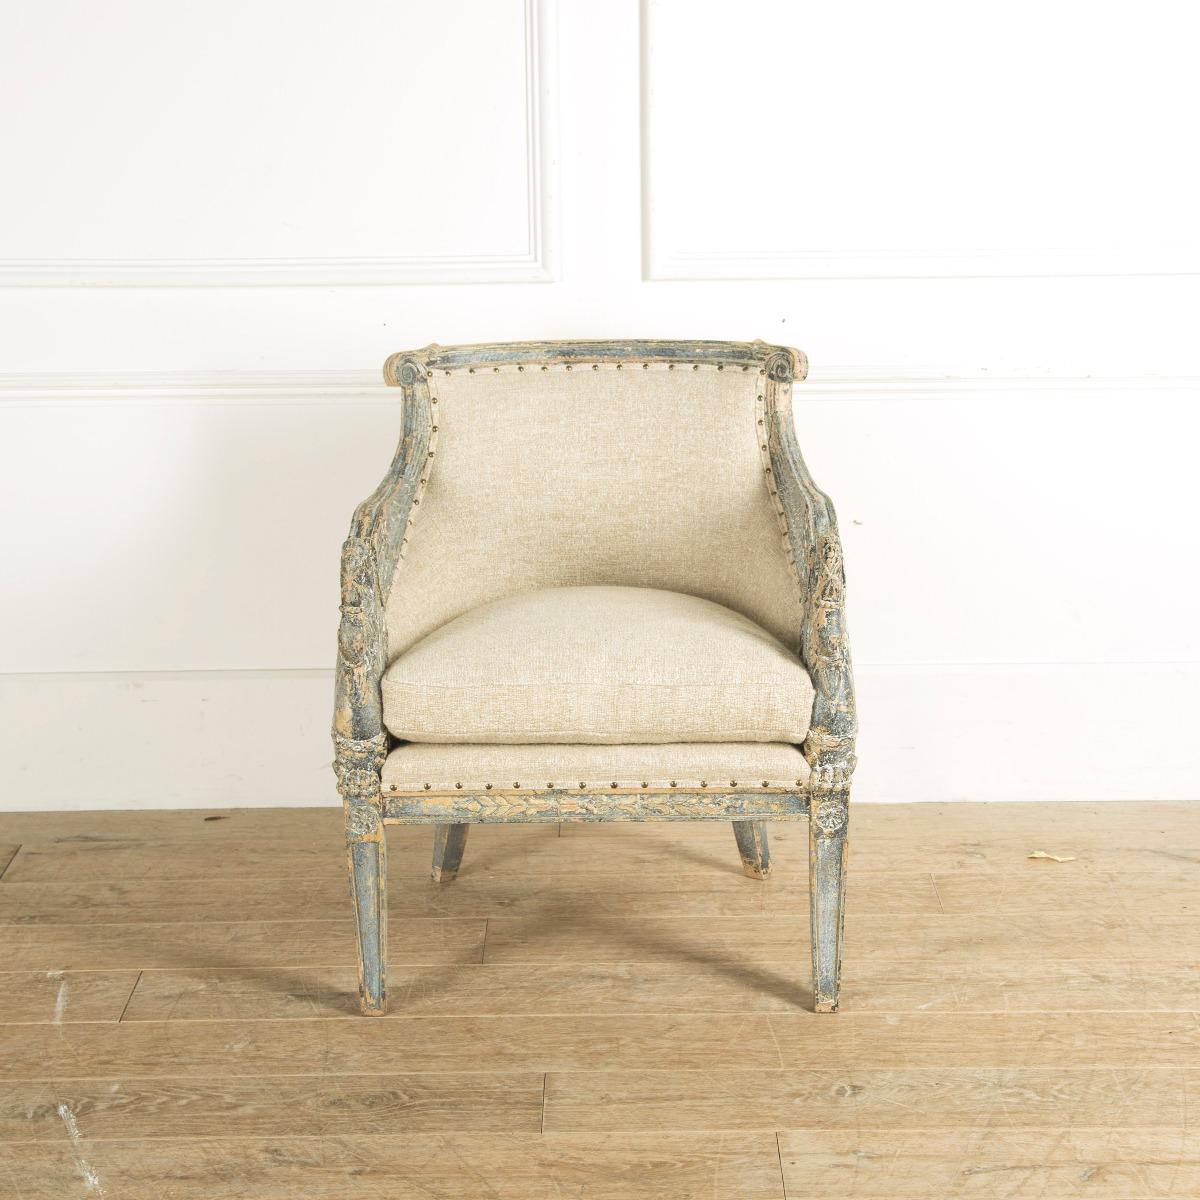 An early 20th century Empire style armchair with intricate carved swan head decoration to the armrests. Remnants of the original gilding and painted finish.